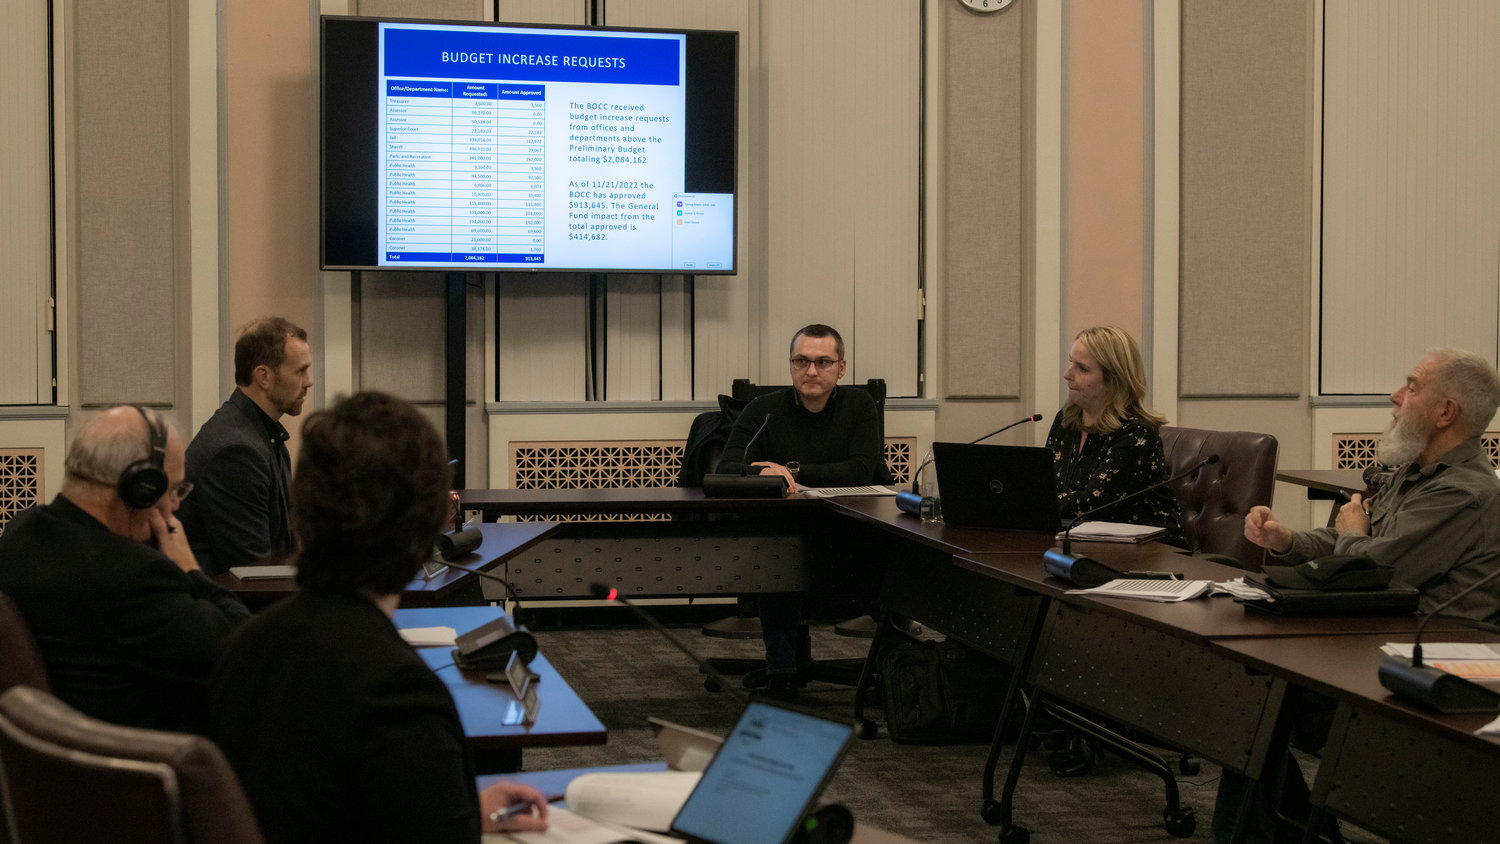 Budget increase requests are reviewed during a meeting on Tuesday at the Lewis County Courthouse in Chehalis.